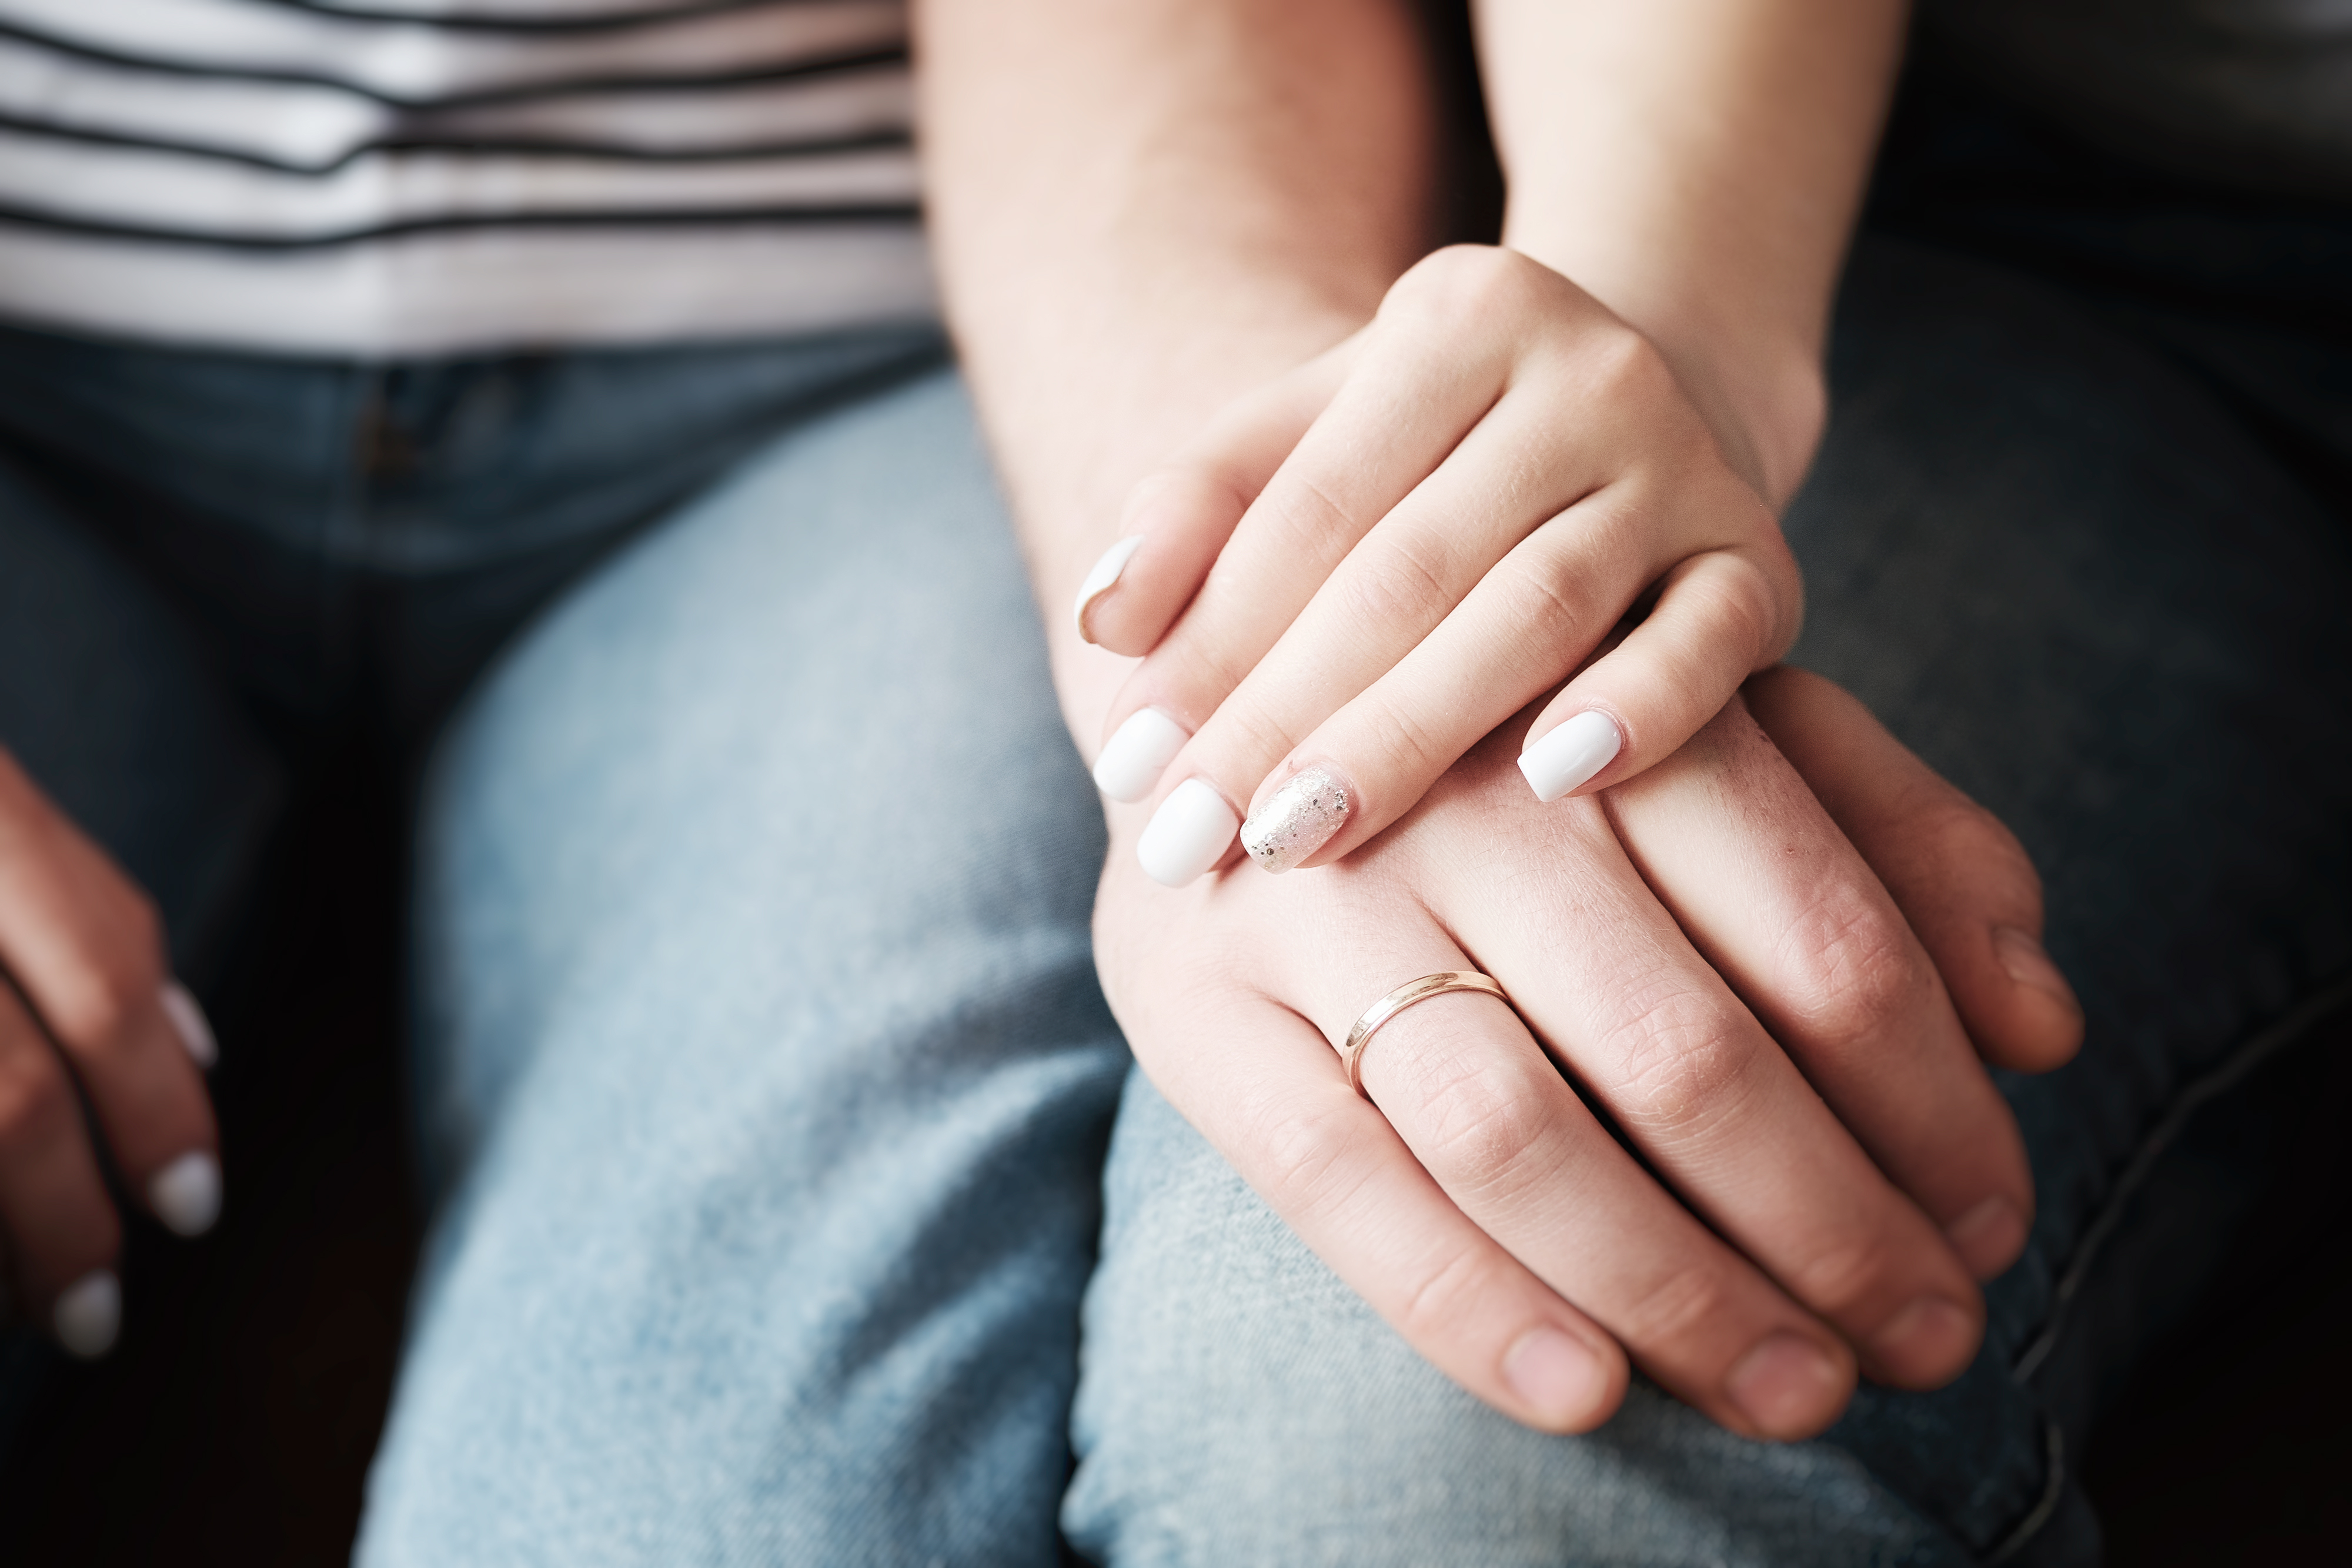 Hands of a man and a woman | Source: Shutterstock